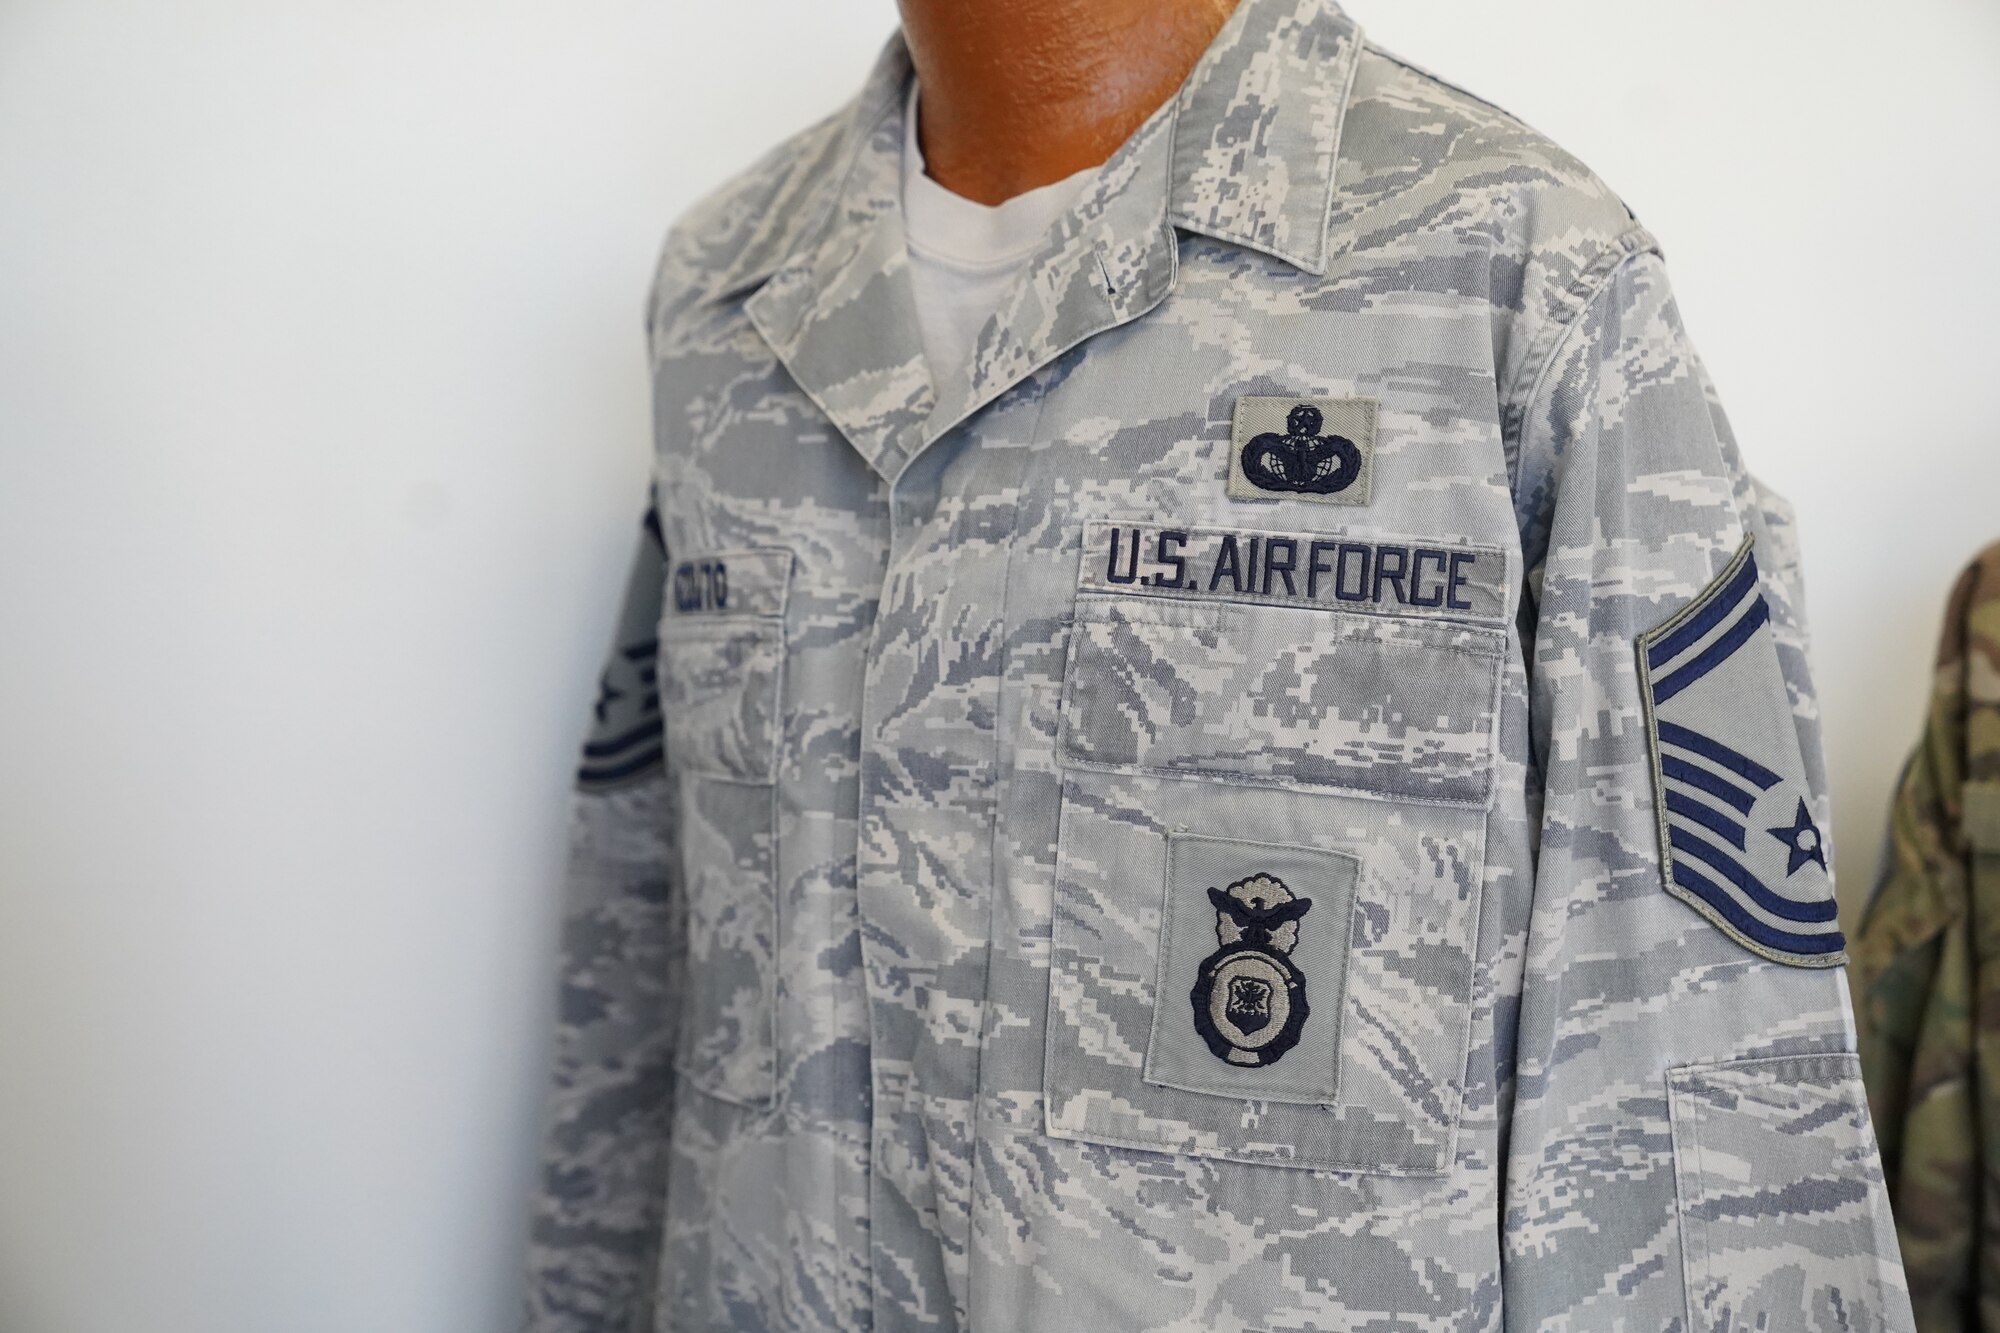 An Airman Battle Uniform owned by Chief Master Sgt. David Pizzuto, 81st Training Wing command chief, is displayed inside of the Levitow Training Support Facility at Keesler Air Force Base, Mississippi, May 6, 2020. Pizzuto, who is slated to retire this month, has served for 37 years and has worn every uniform the Air Force has ever known. (U.S. Air Force photo by Airman 1st Class Spencer Tobler)